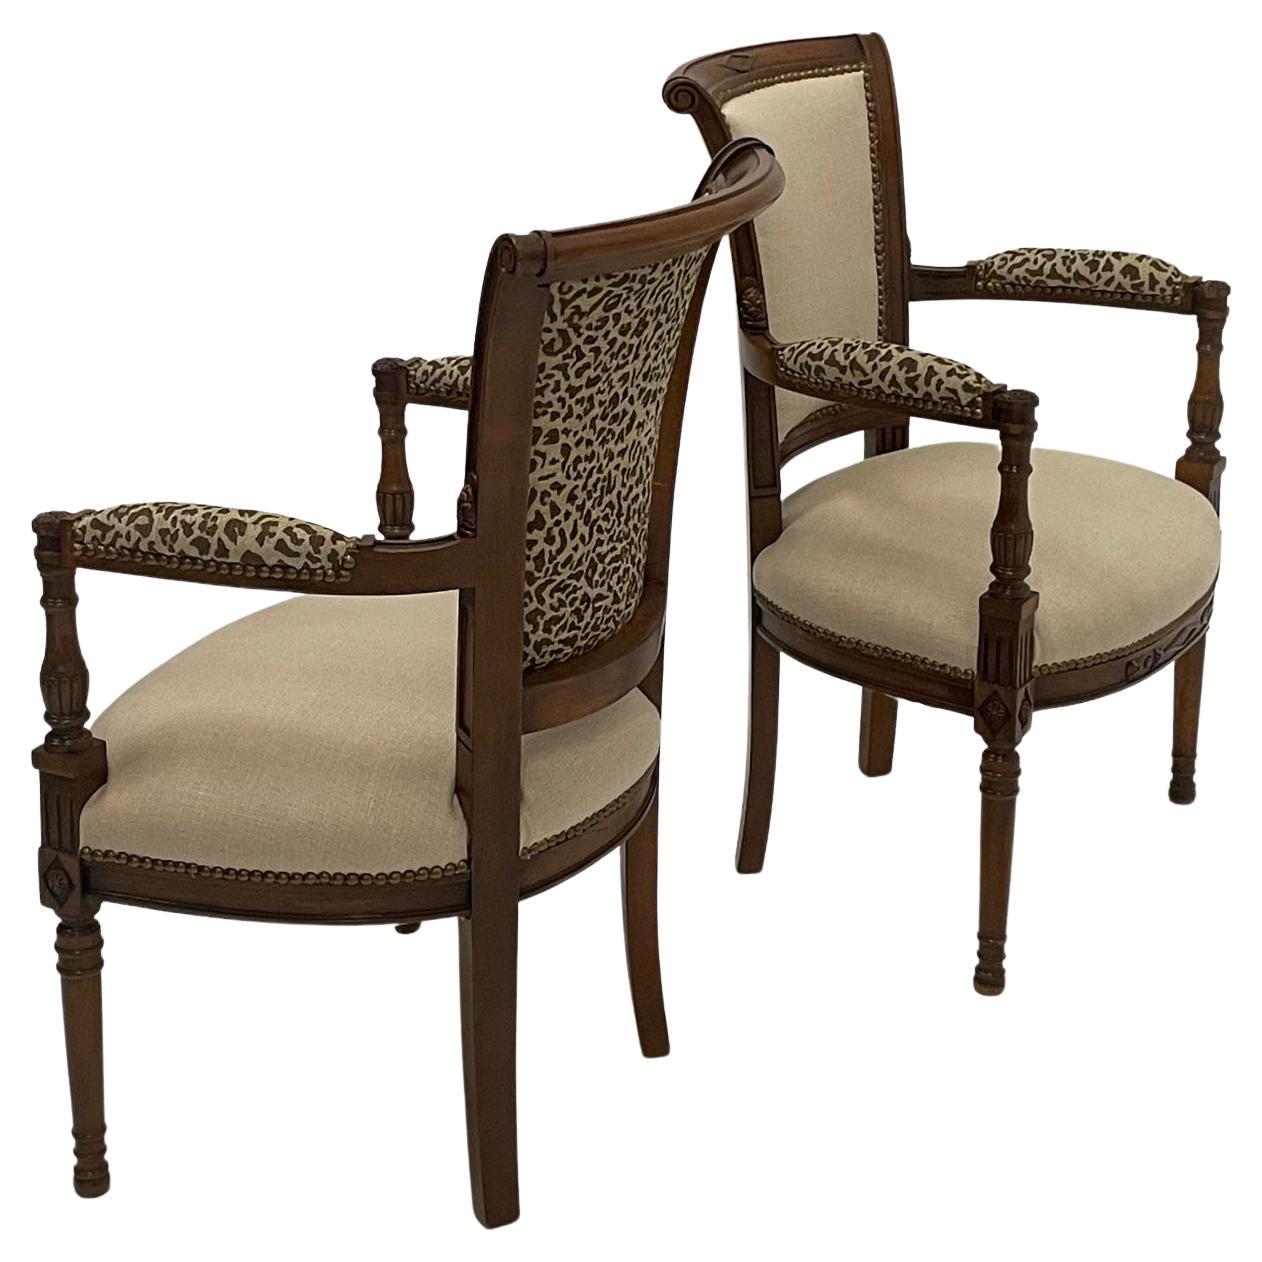 Superbly Stylish Pair of Carved Walnut Armchairs Upholstered in Linen & Leopard